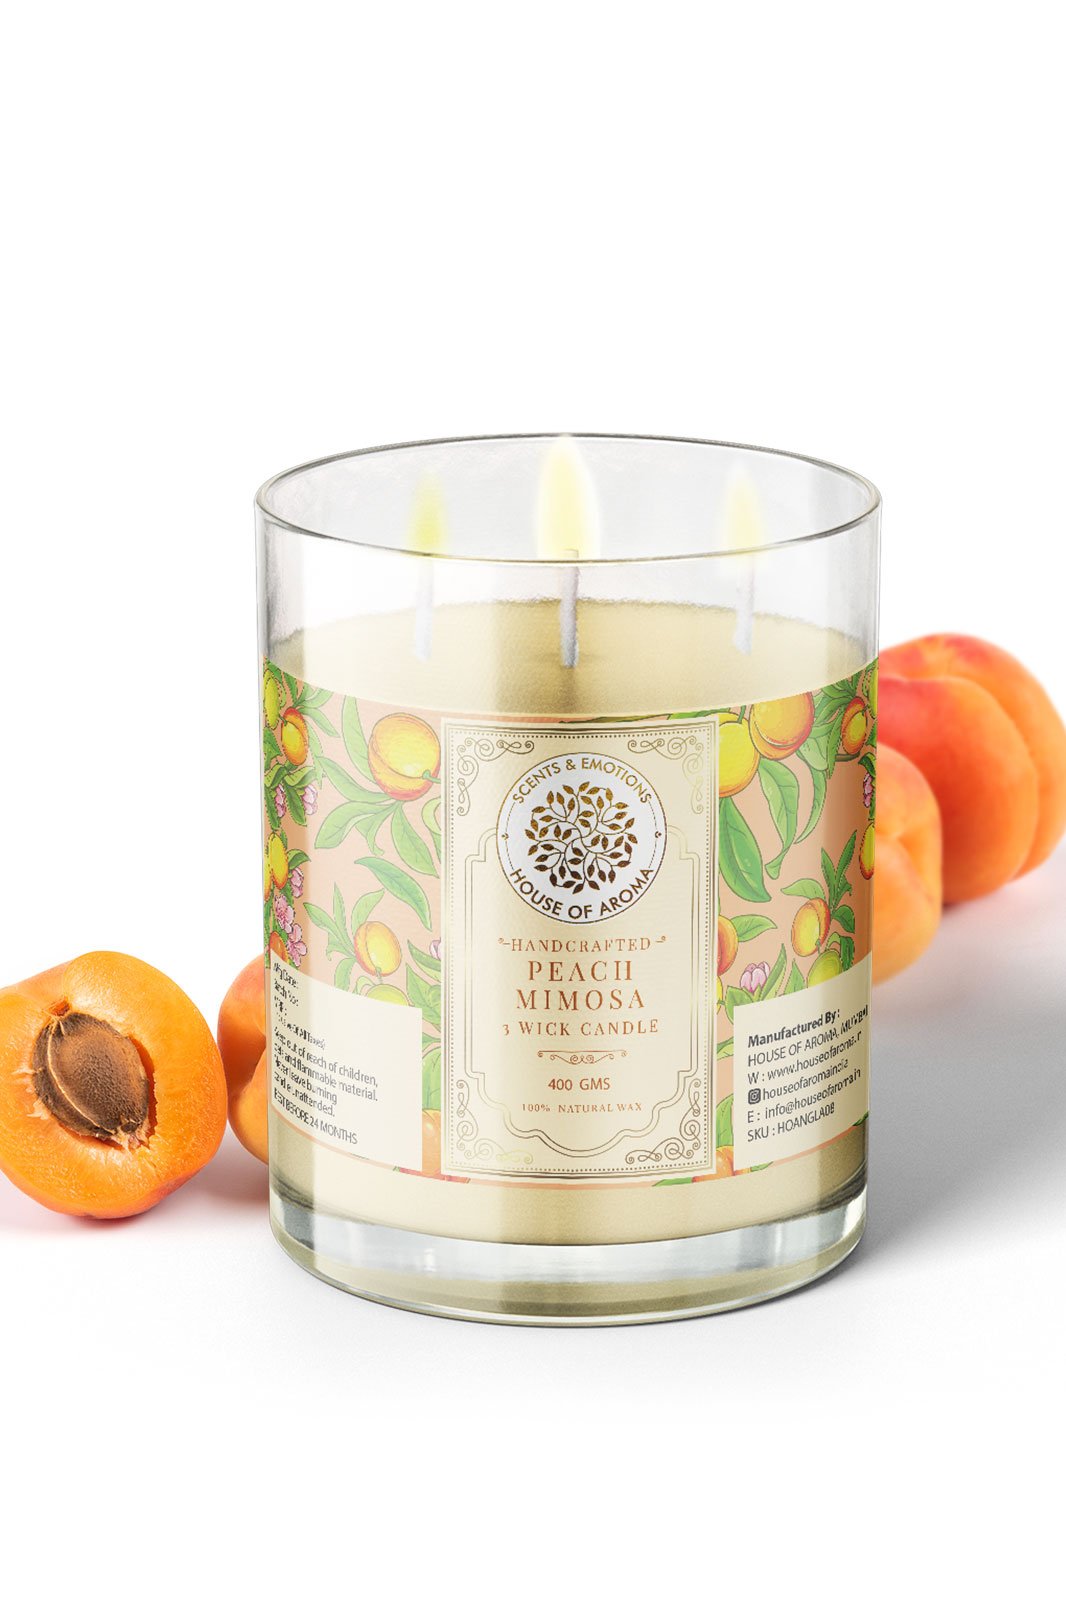 natural wax peach mimosa candle 3 wicks, 3 wicks scented candles, peach-scented candles, 3 wicks candles, candle with fragrance, 3 wick jar candles, best 3 wick scented candles, peach scented oil, scent 3 wick pillar candles, benefits of 3 wick candles, highly scented 3-wick candles, best wick for scented candles, 3 wick soy wax candles, best fragrance-scented candles, 3 wick aromatherapy candles, best scents for scented candles, peach candle fragrance oil, best scents in candles, best peach-scented candle, decorative scented candles, candles for home, home decor candles, decoration with candles, best-scented candles in India, candles with fragrance, candles for room decoration, home decor with candles, home decor candle